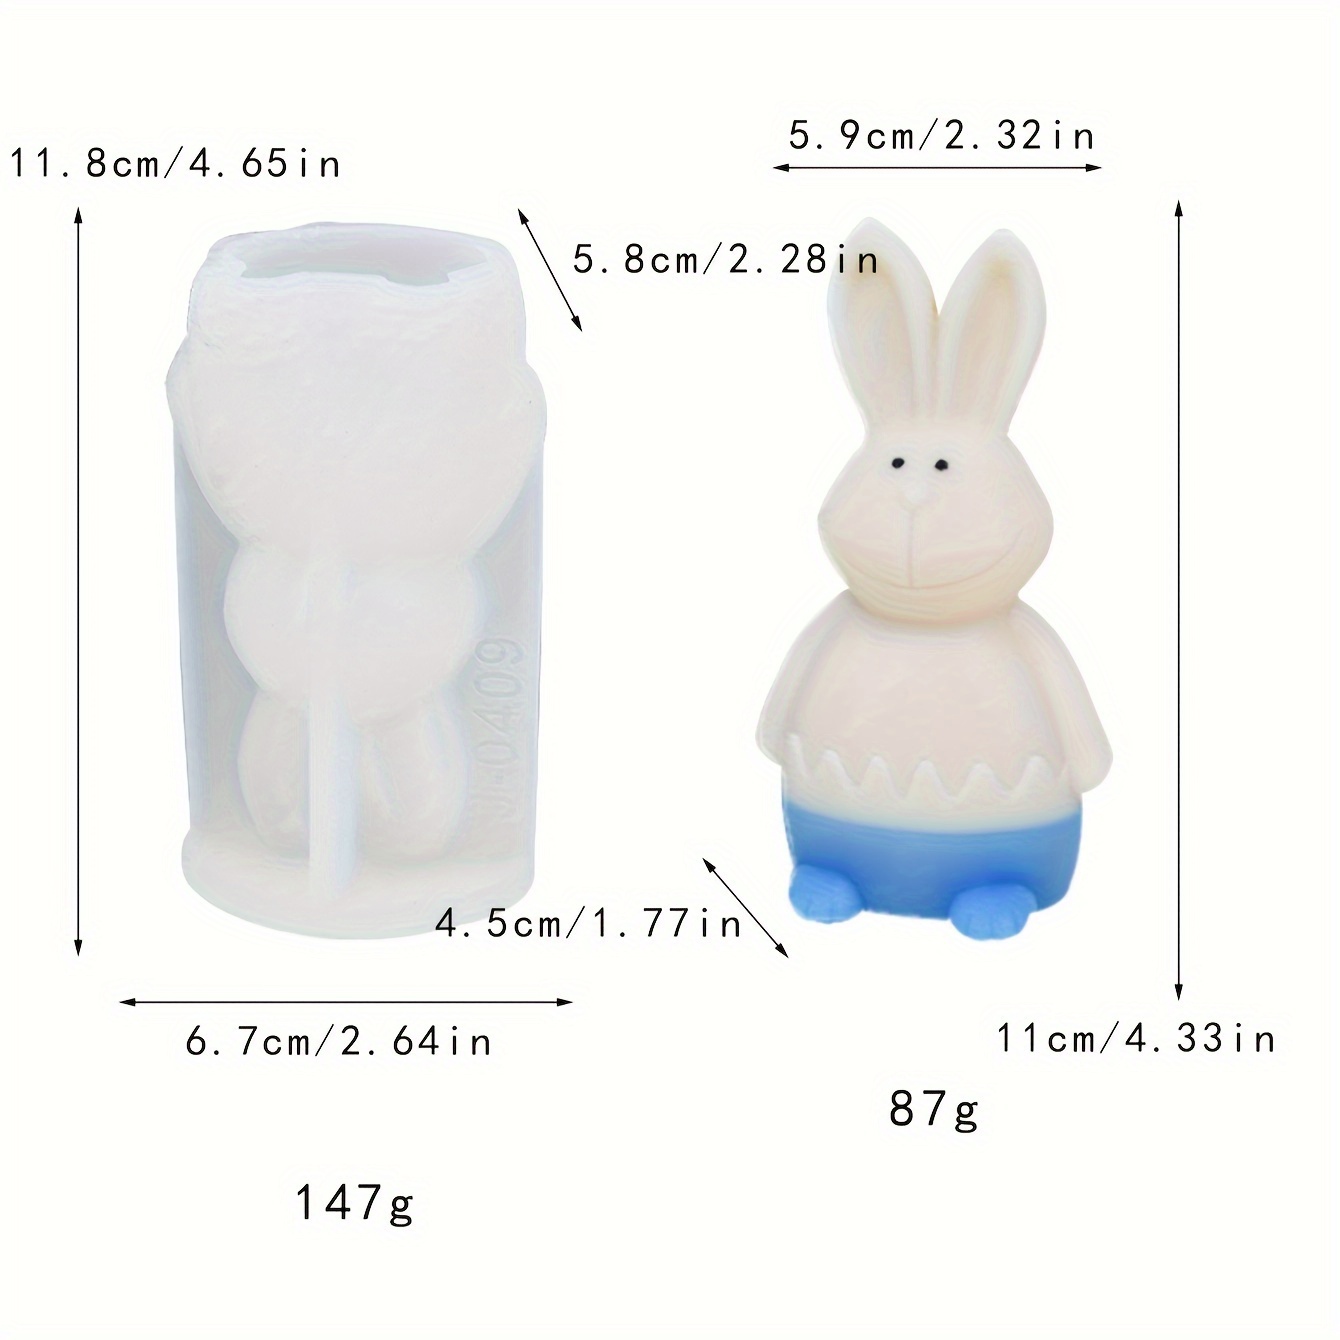 Medium Egg Silicone Mould, Plaster Egg Mould, Wax Mould, 